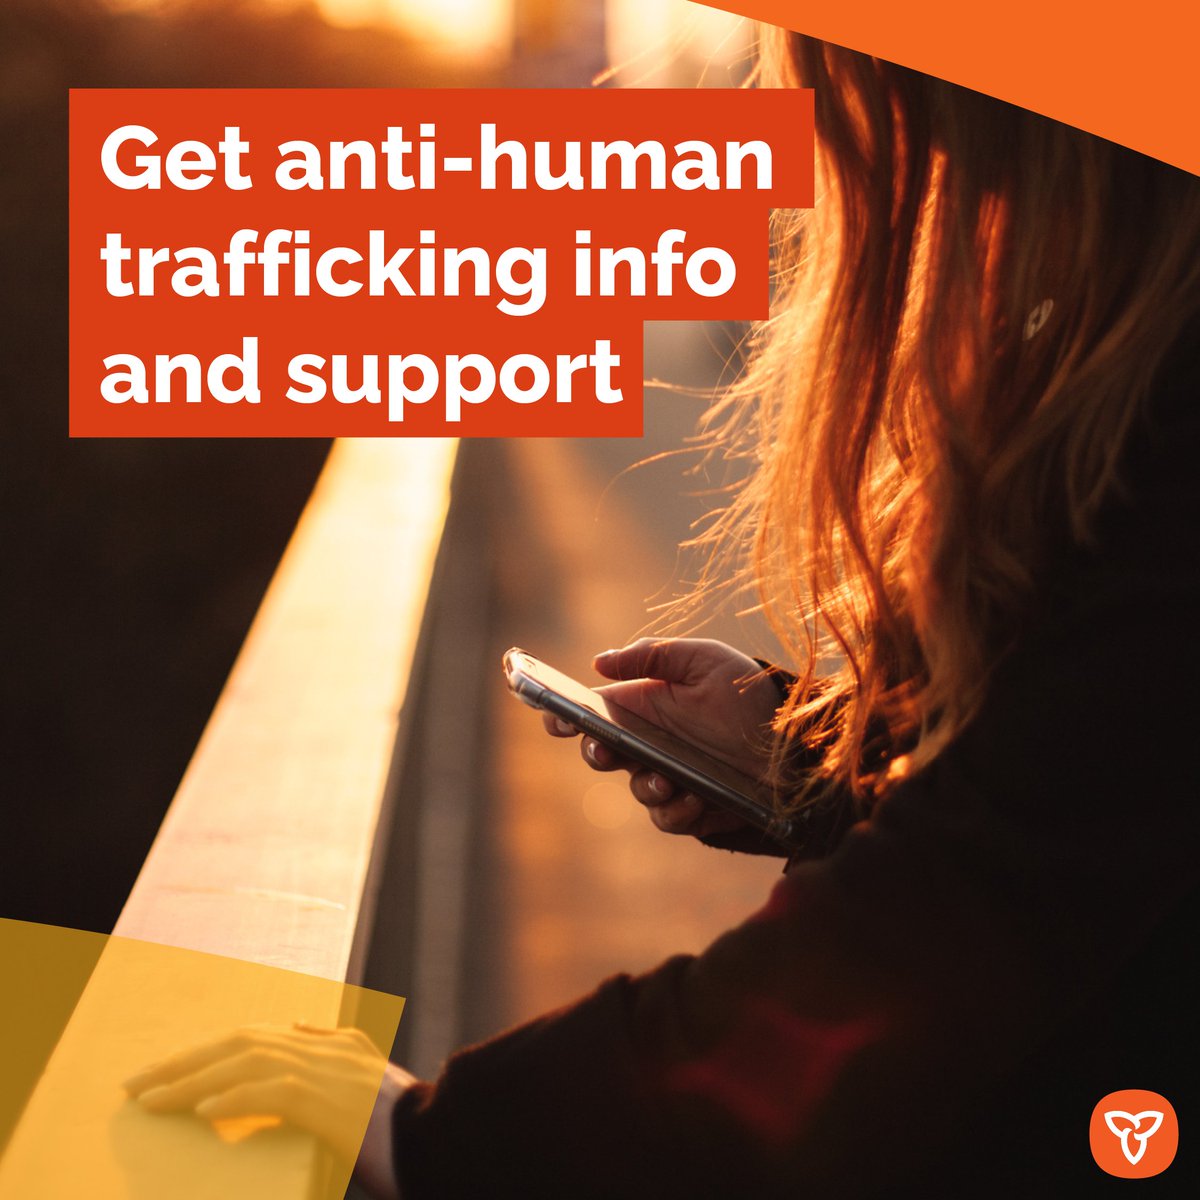 The Canadian Human Trafficking Hotline is a 24/7, confidential, multilingual service to help victims & survivors of #HumanTrafficking. If you or someone you know is a victim of human trafficking, call 📞 1-833-900-1010 or visit: 💬canadianhumantraffickinghotline.ca